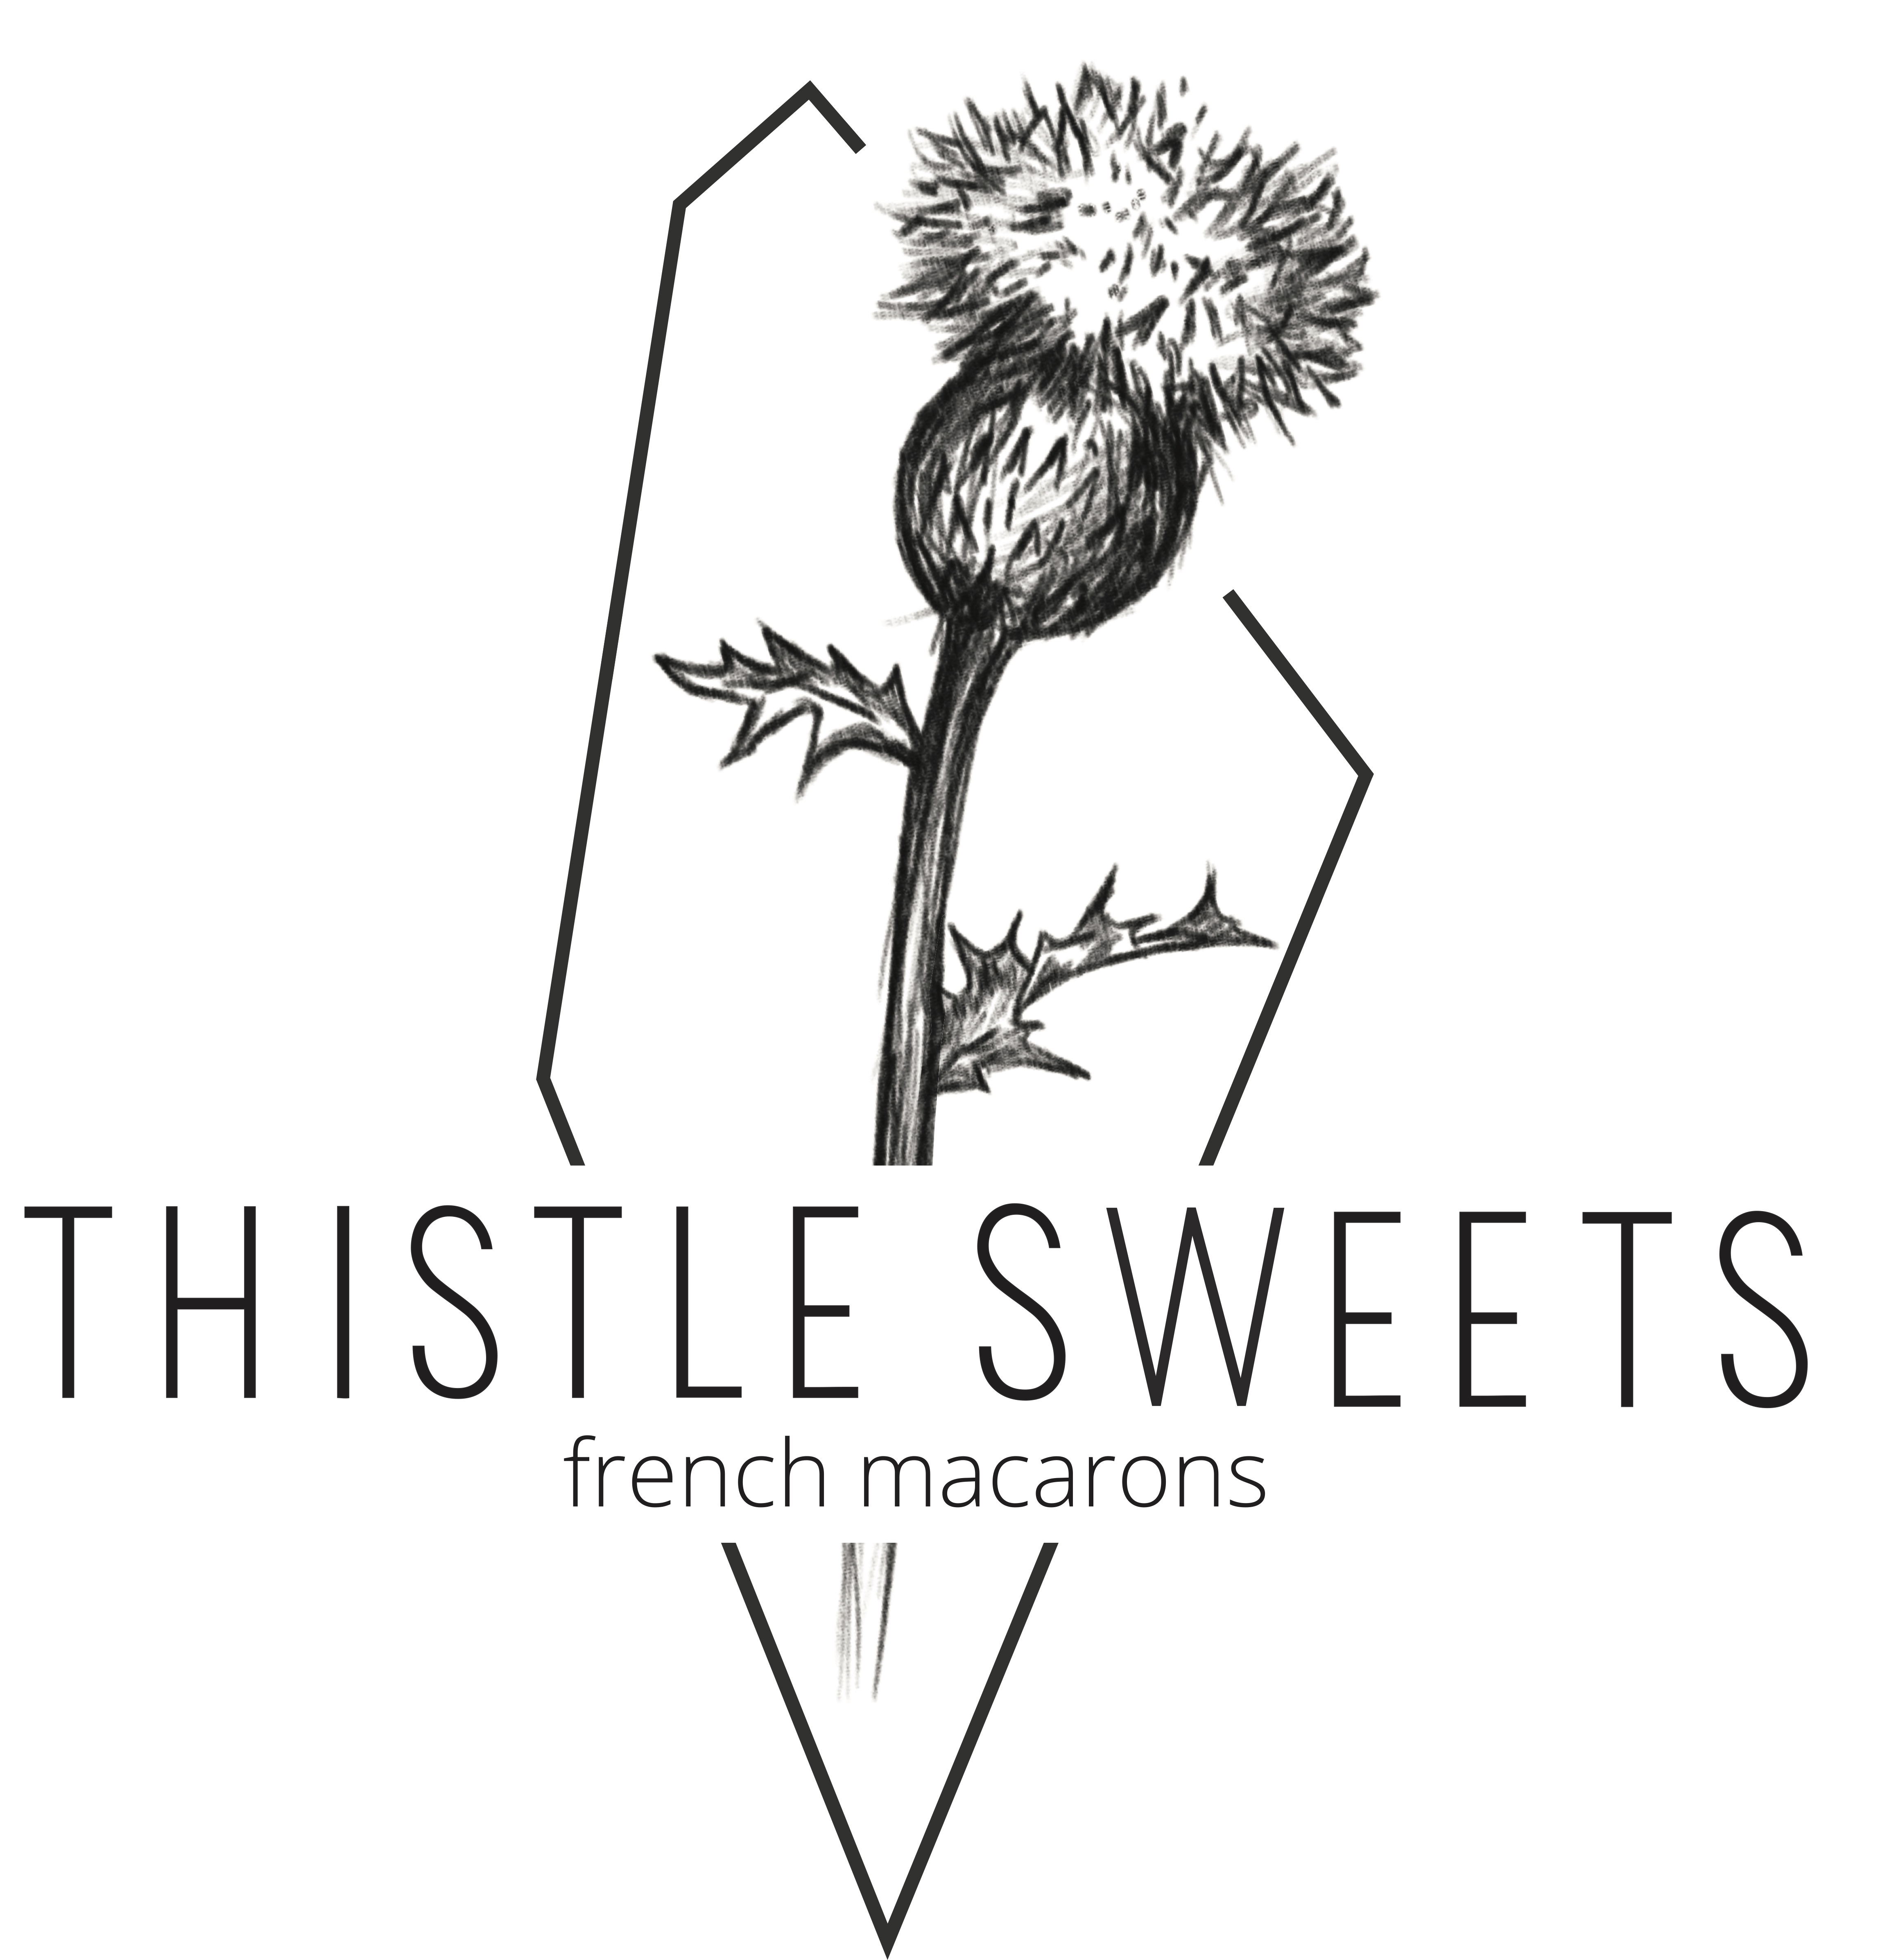 Thistle Sweets